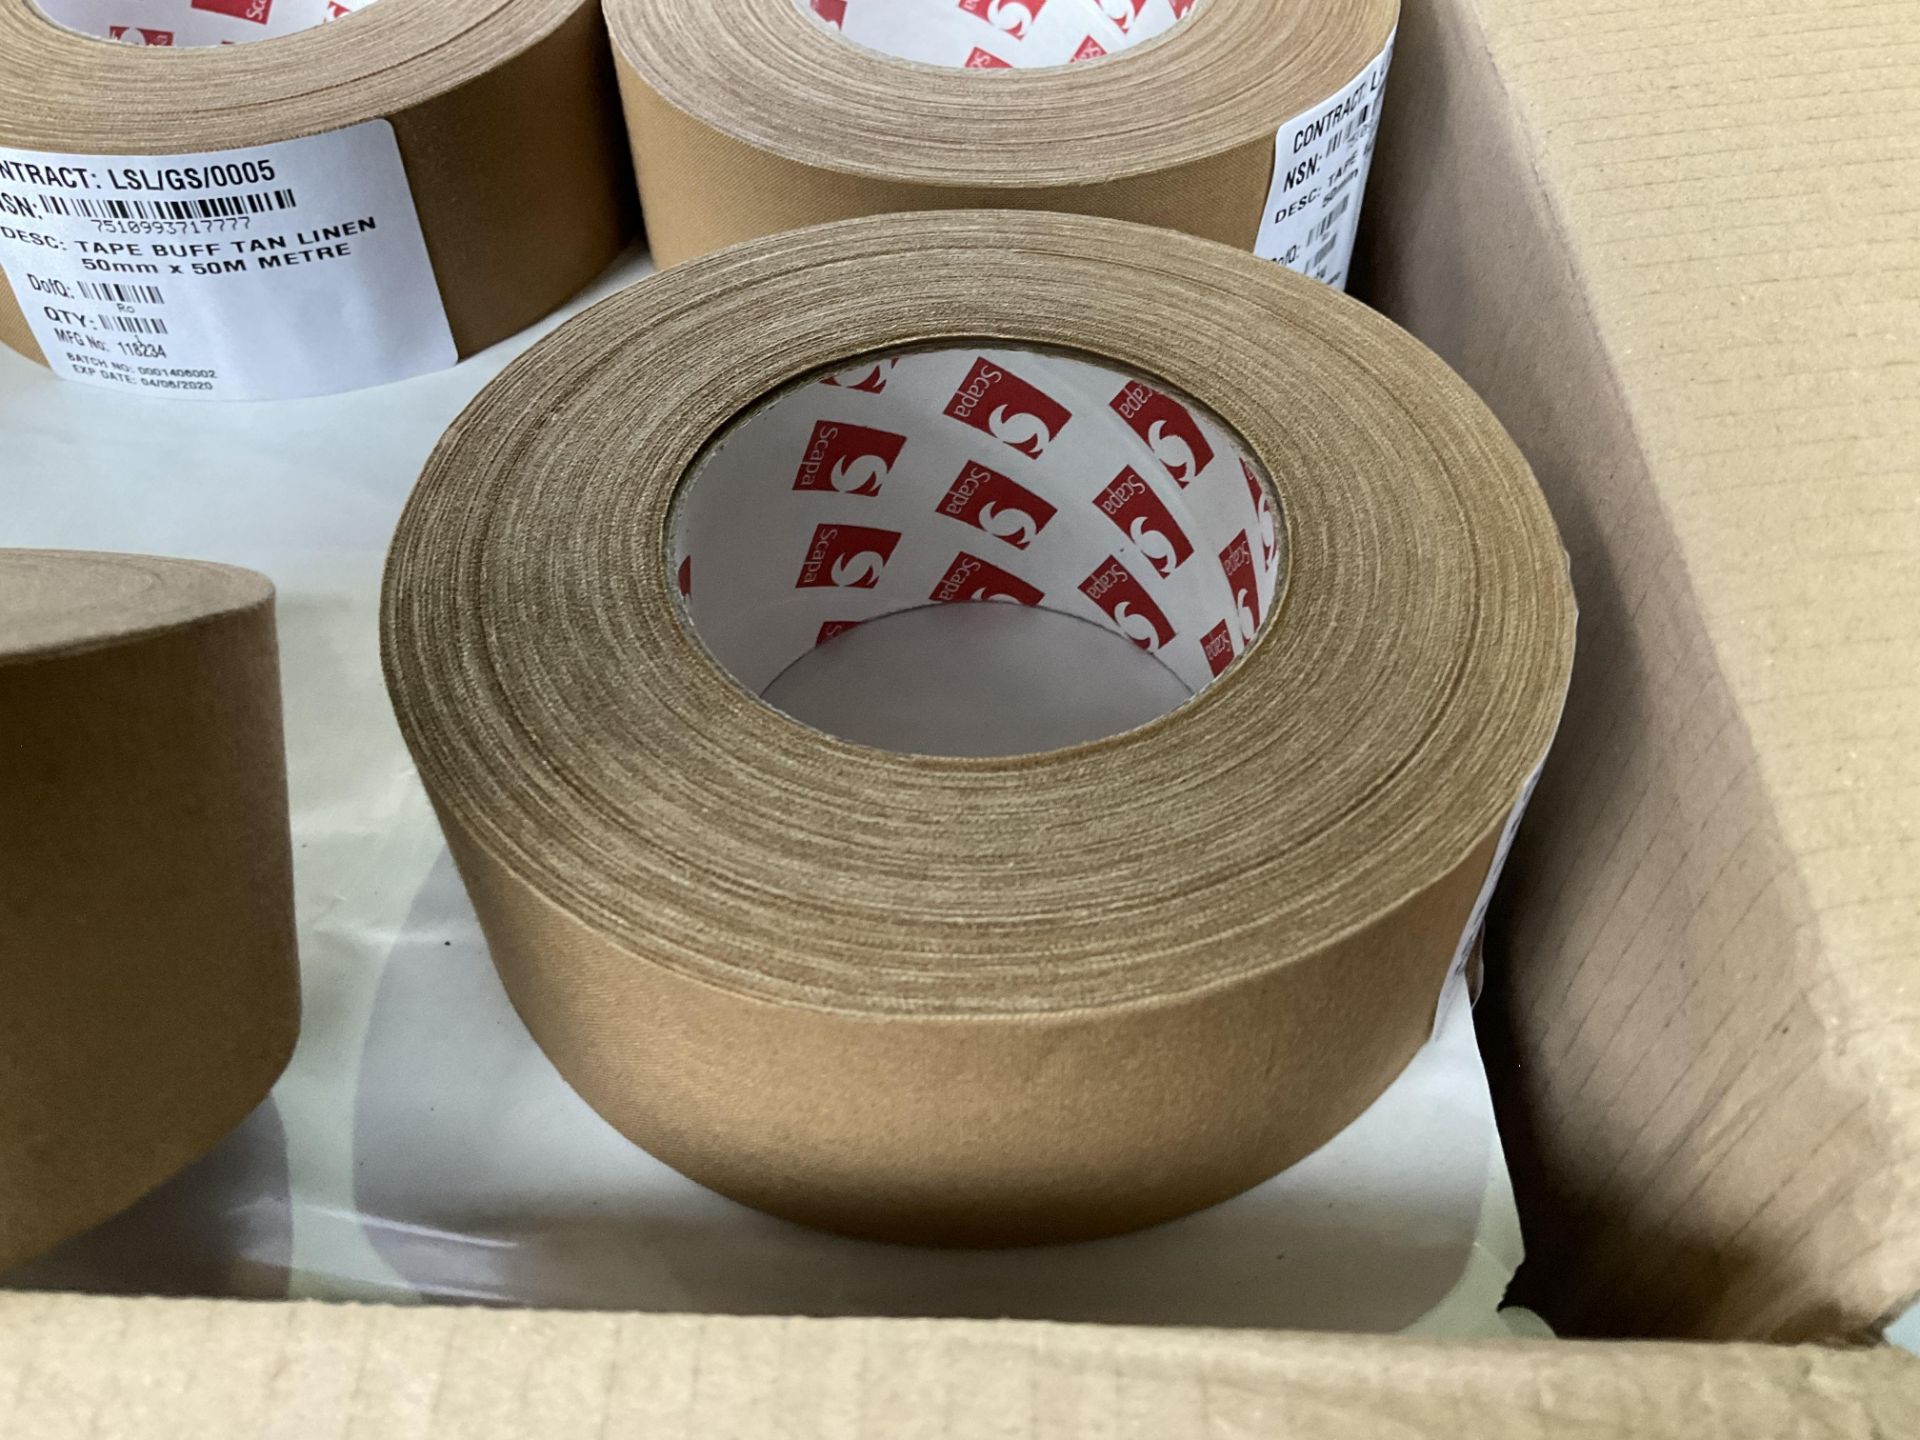 16X 50m ROLLS OF TAPE BUFF TAN LINEN NEW IN ORIGINAL PACKING - Image 3 of 4